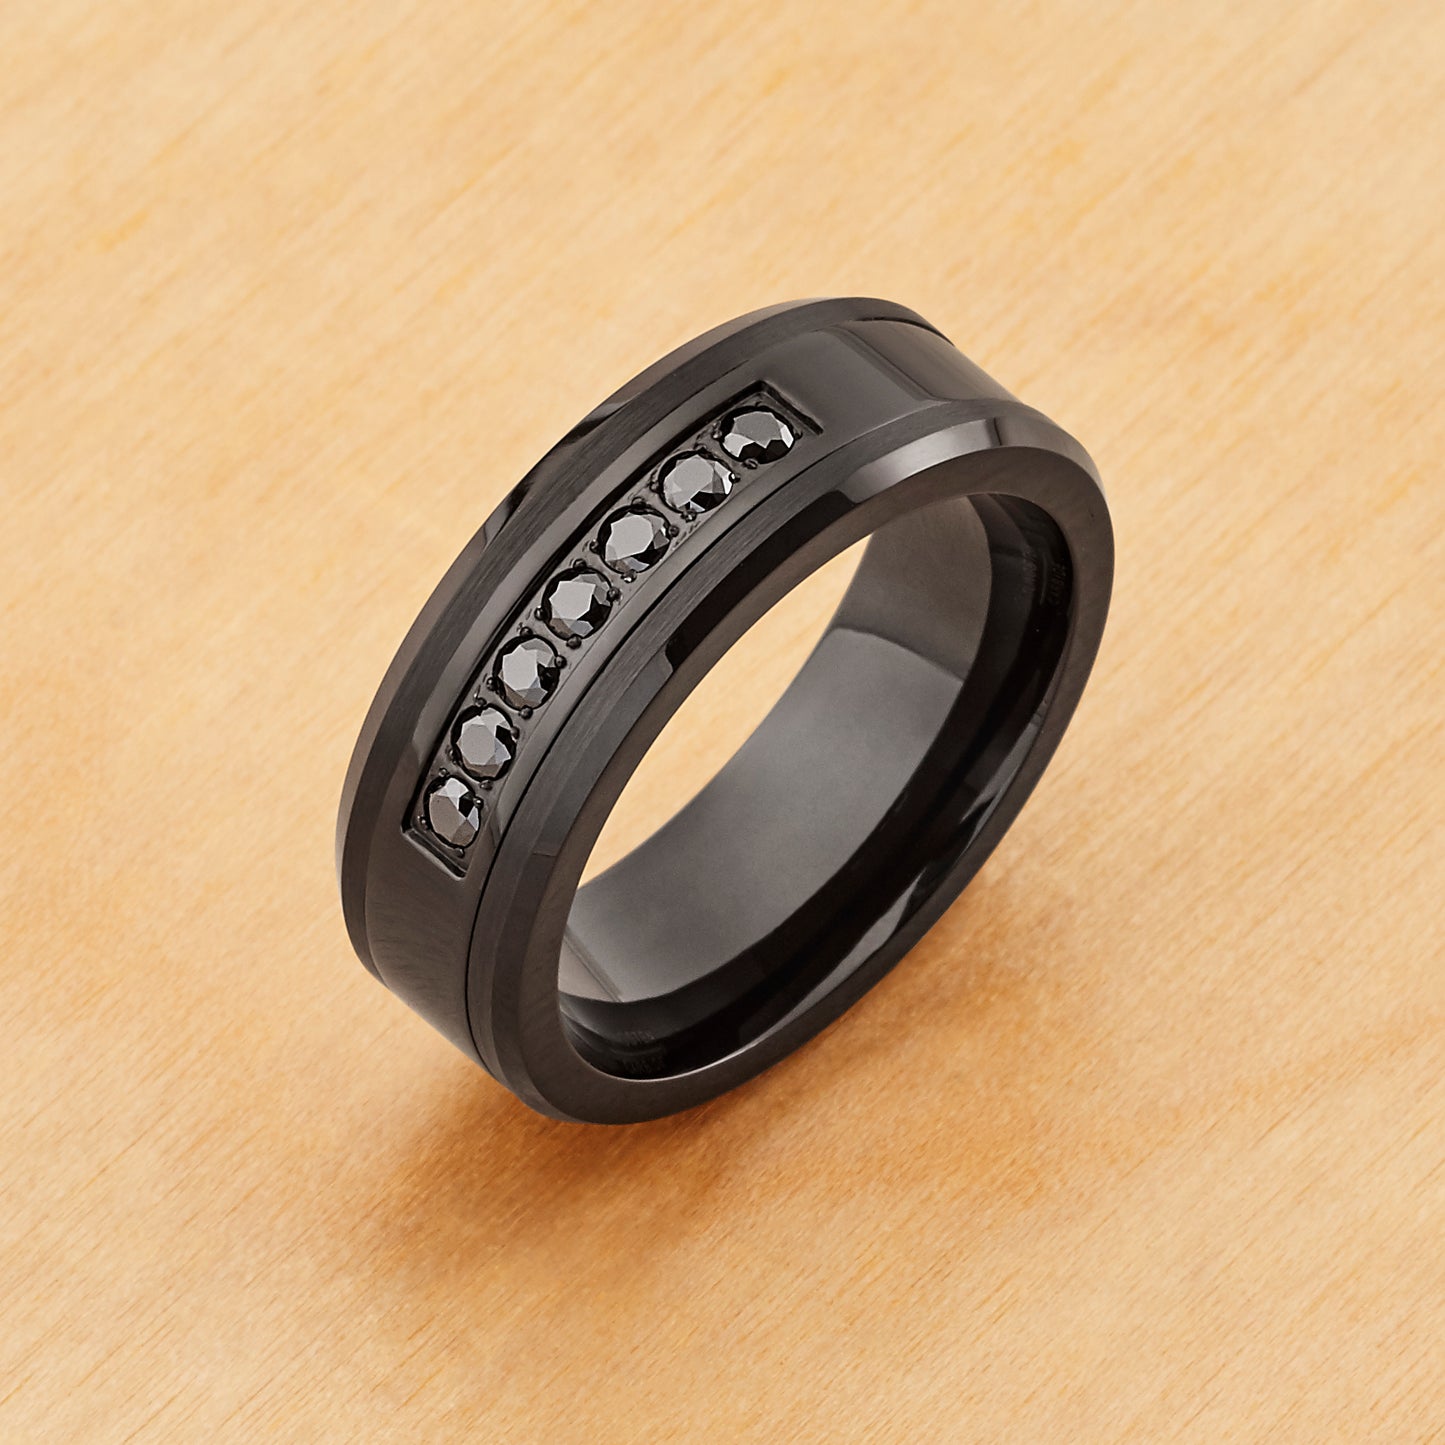 TR888 - Black Plating - Tungsten Ring 8mm, Black IP Plated Beveled Edge with 7 Black CZ